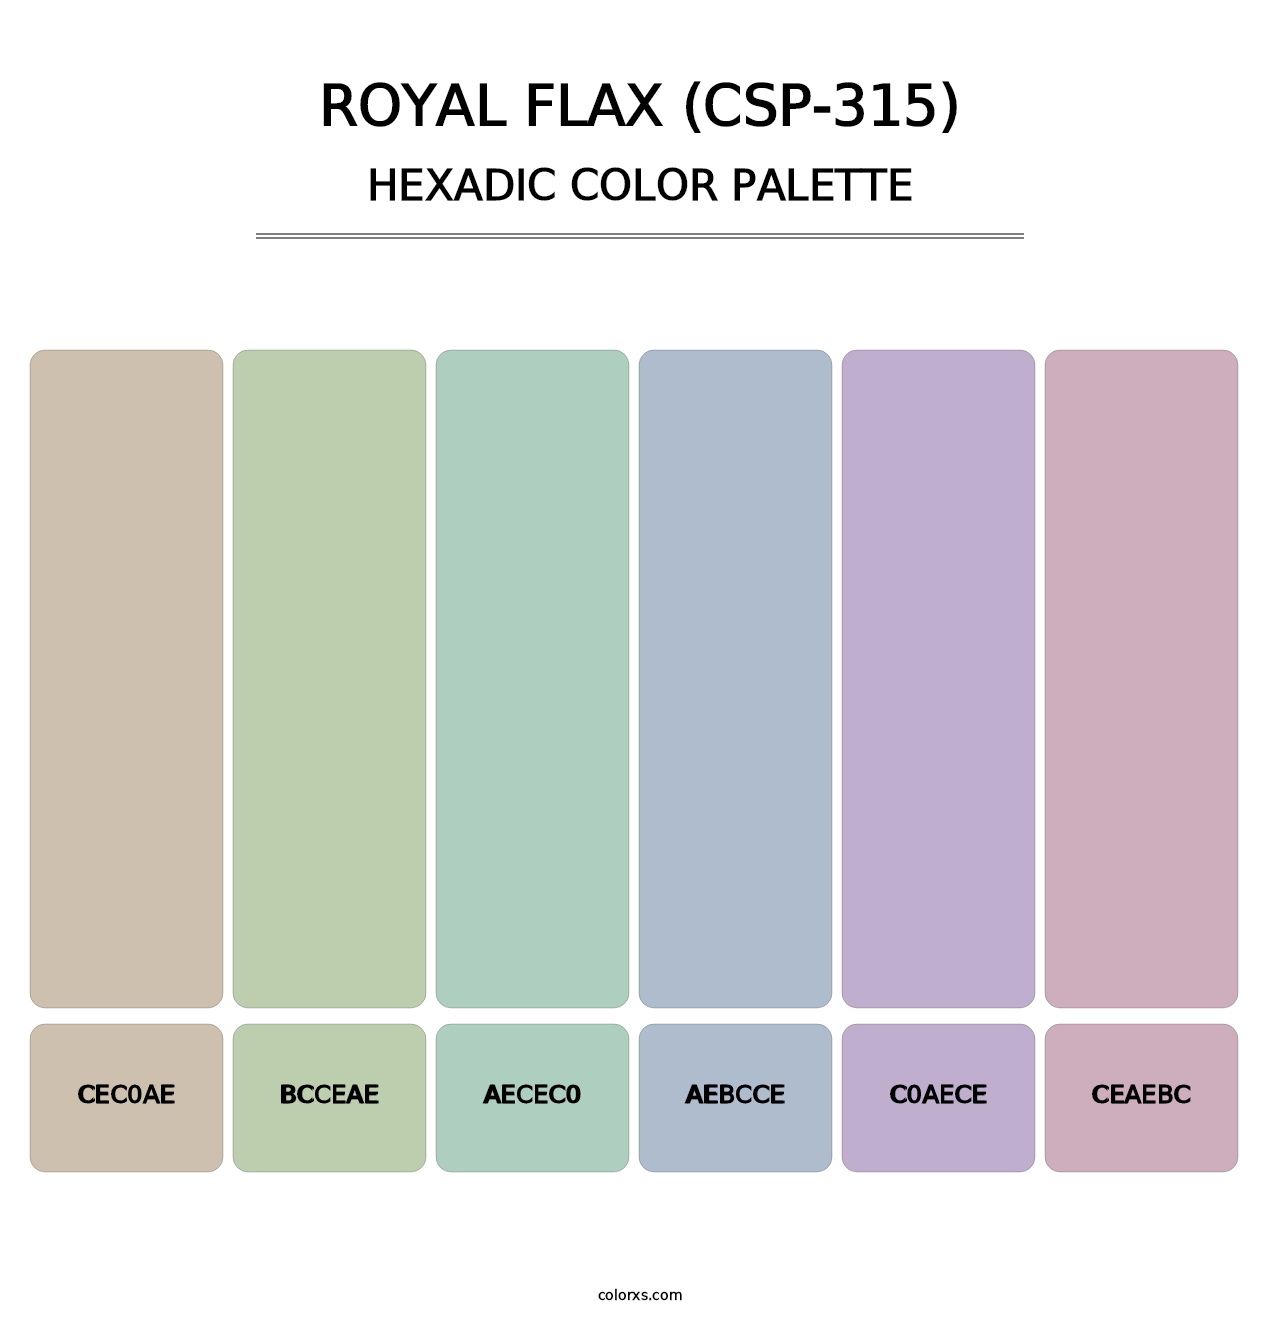 Royal Flax (CSP-315) - Hexadic Color Palette